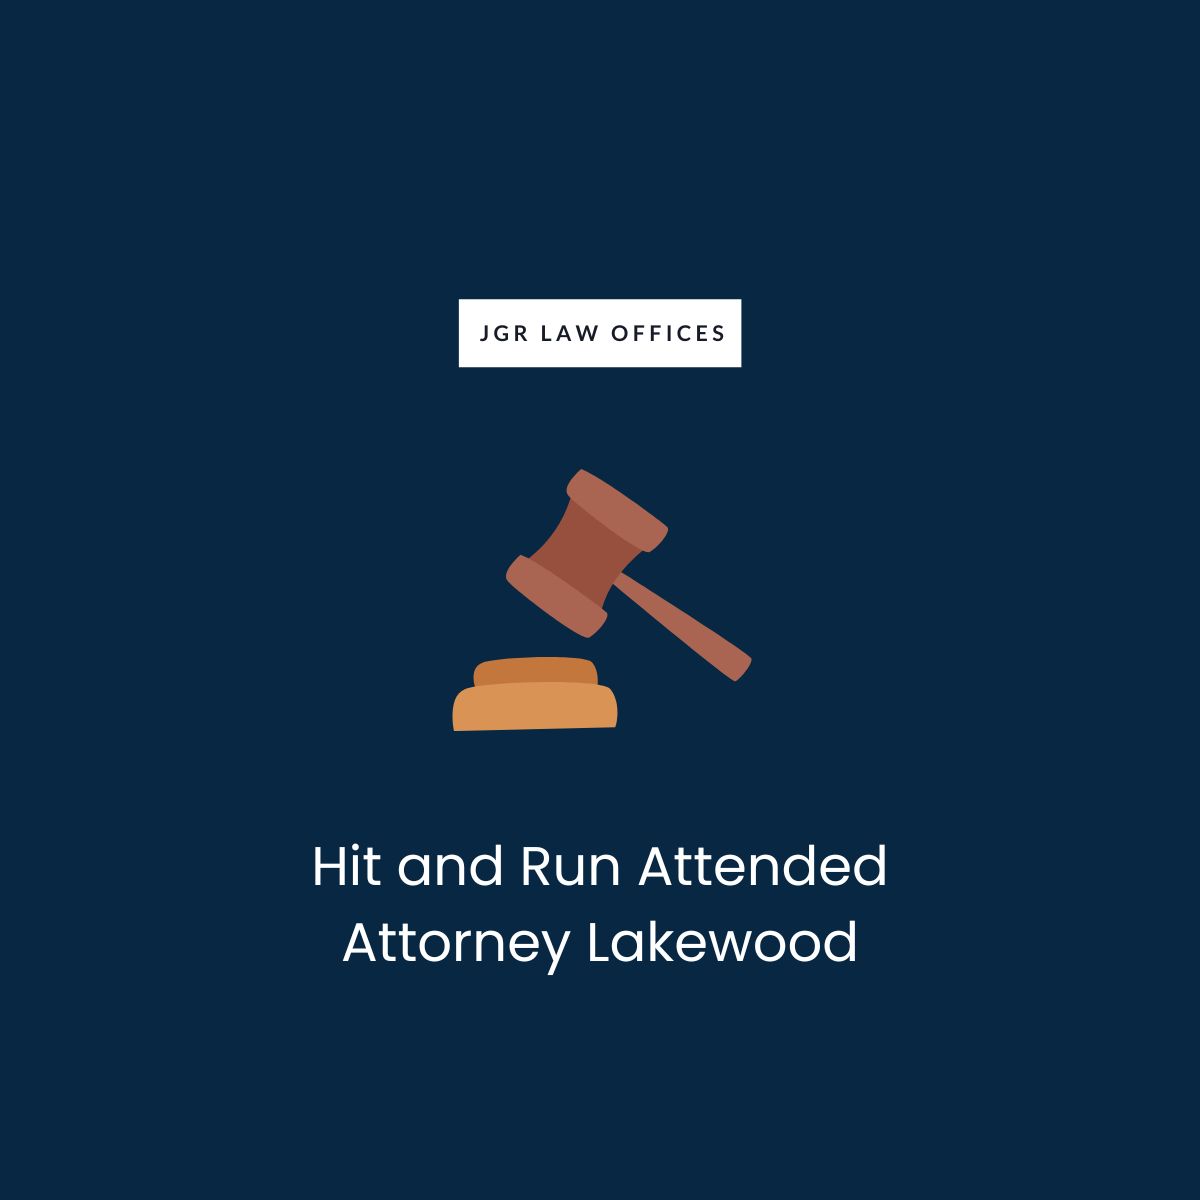 Hit and Run Attended Attorney Lakewood